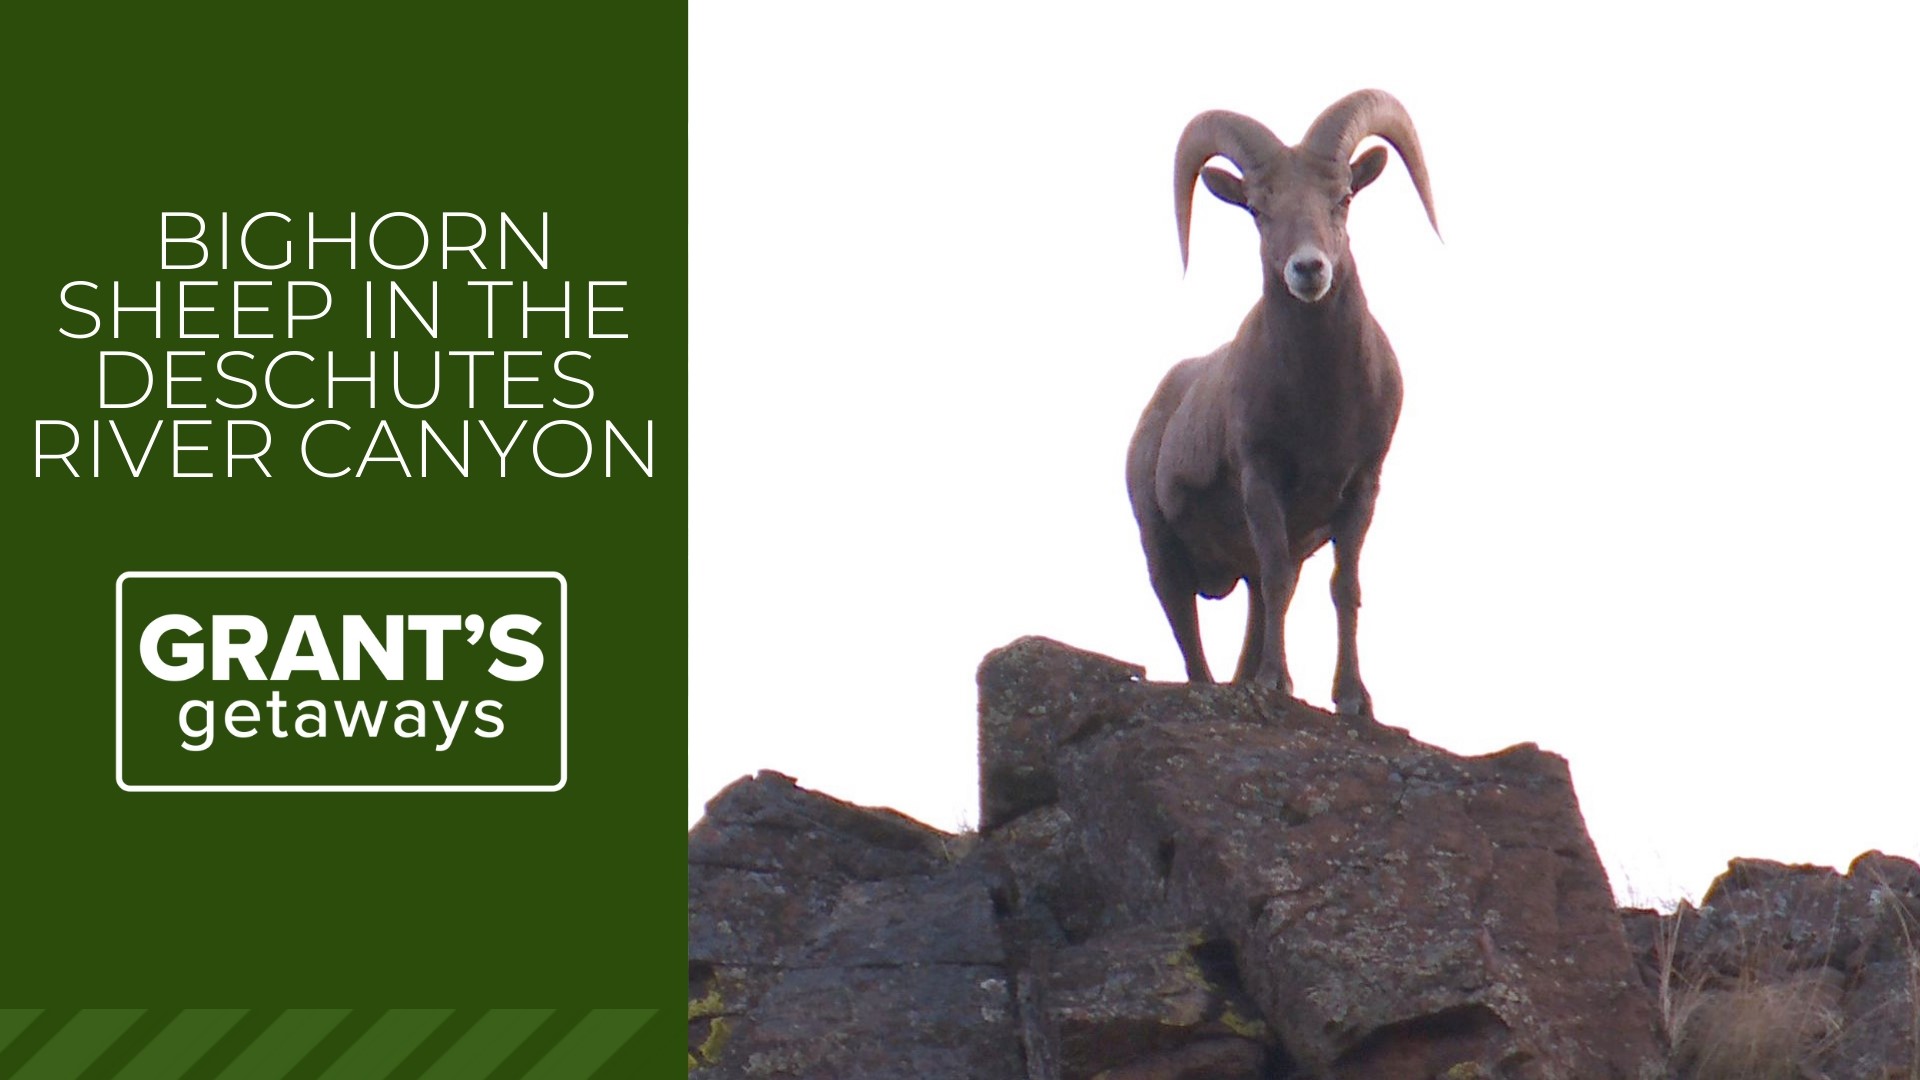 Join KGW's Grant McOmie for an adventure chasing bighorn sheep in Oregon's Deschutes River Canyon.